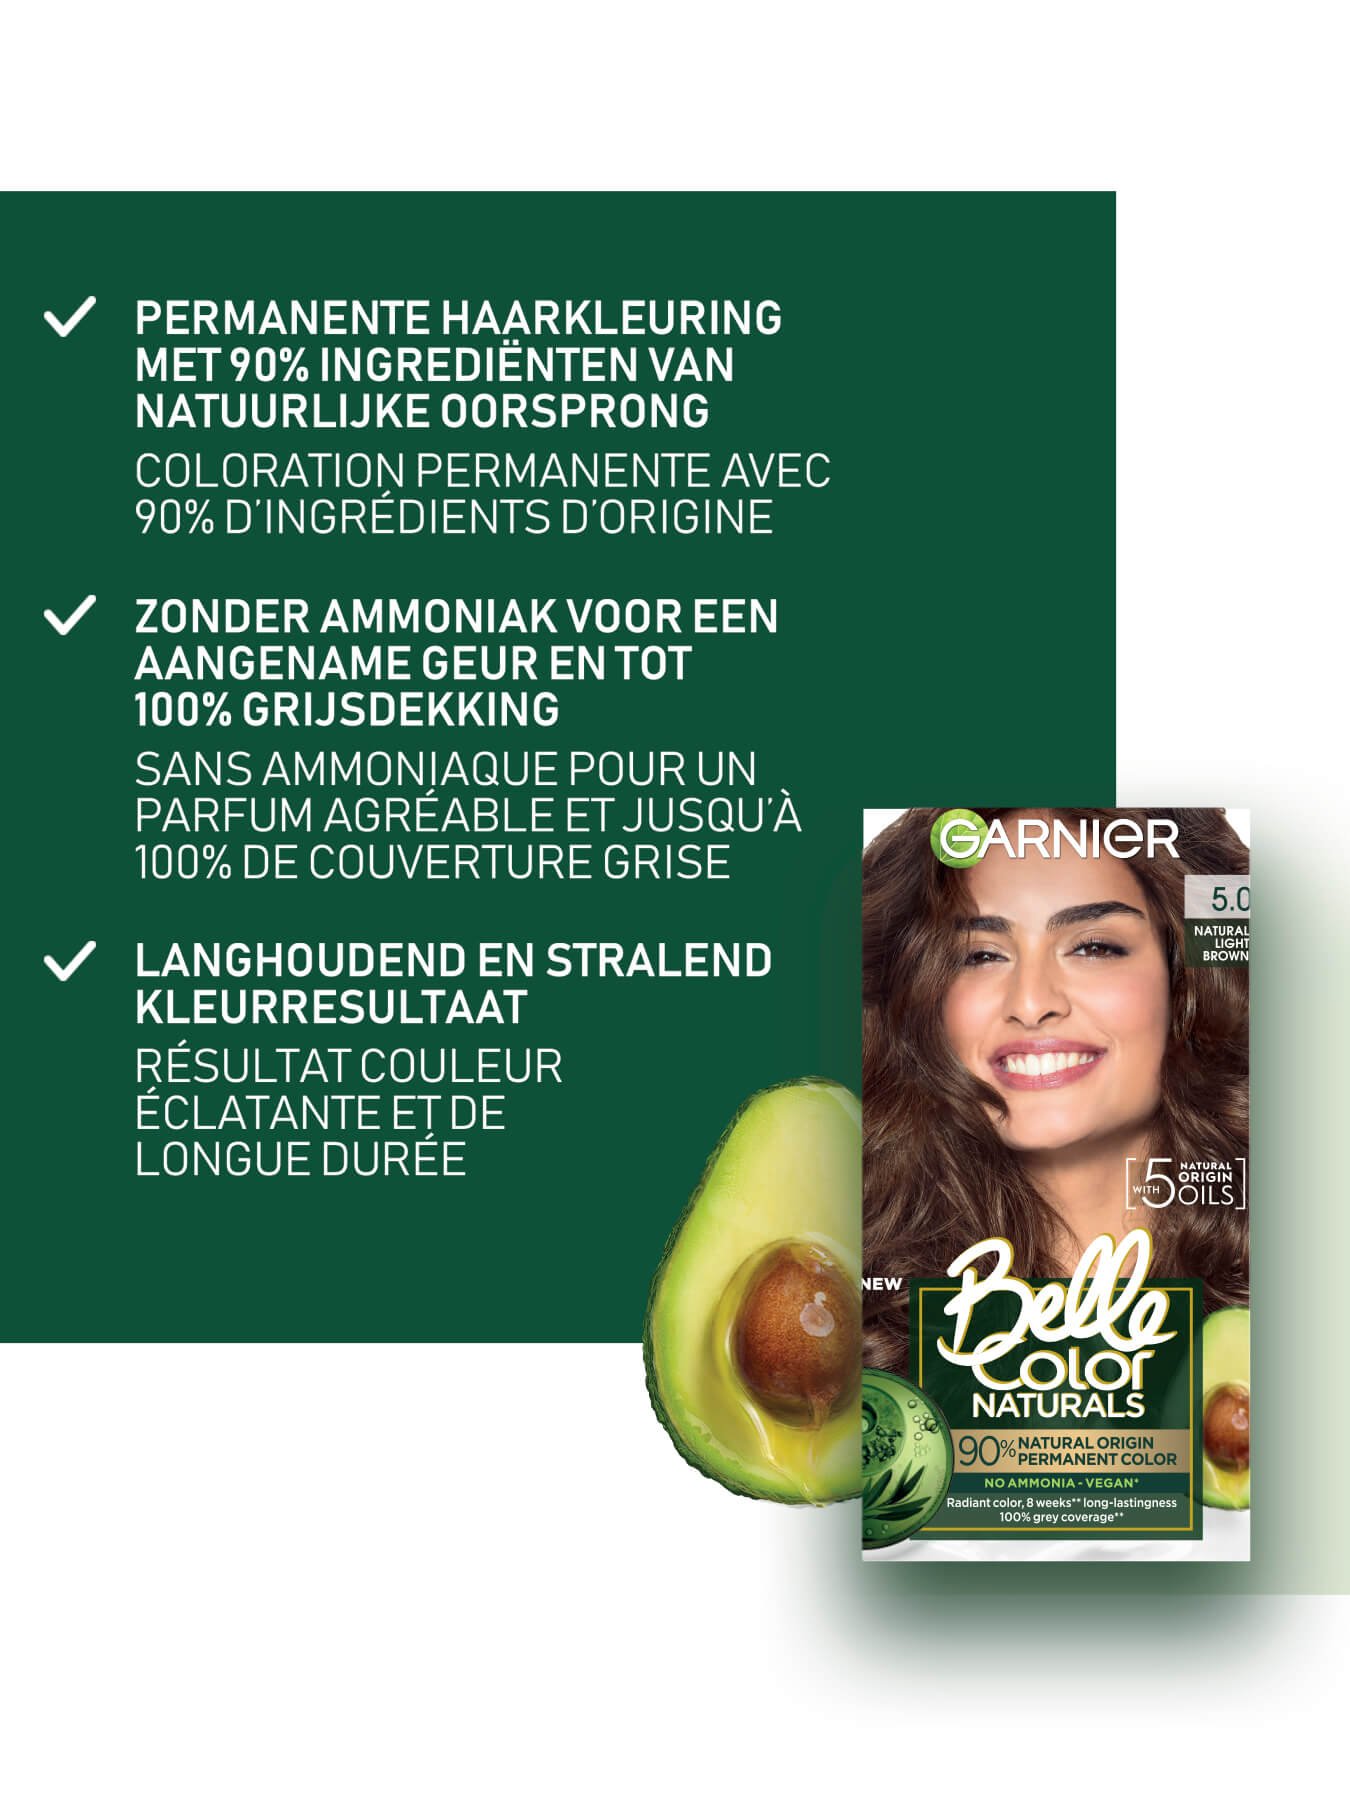 8127170 Belle Color Naturals Resizing keyclaims 5 0 BE 1350x1800px jpg master